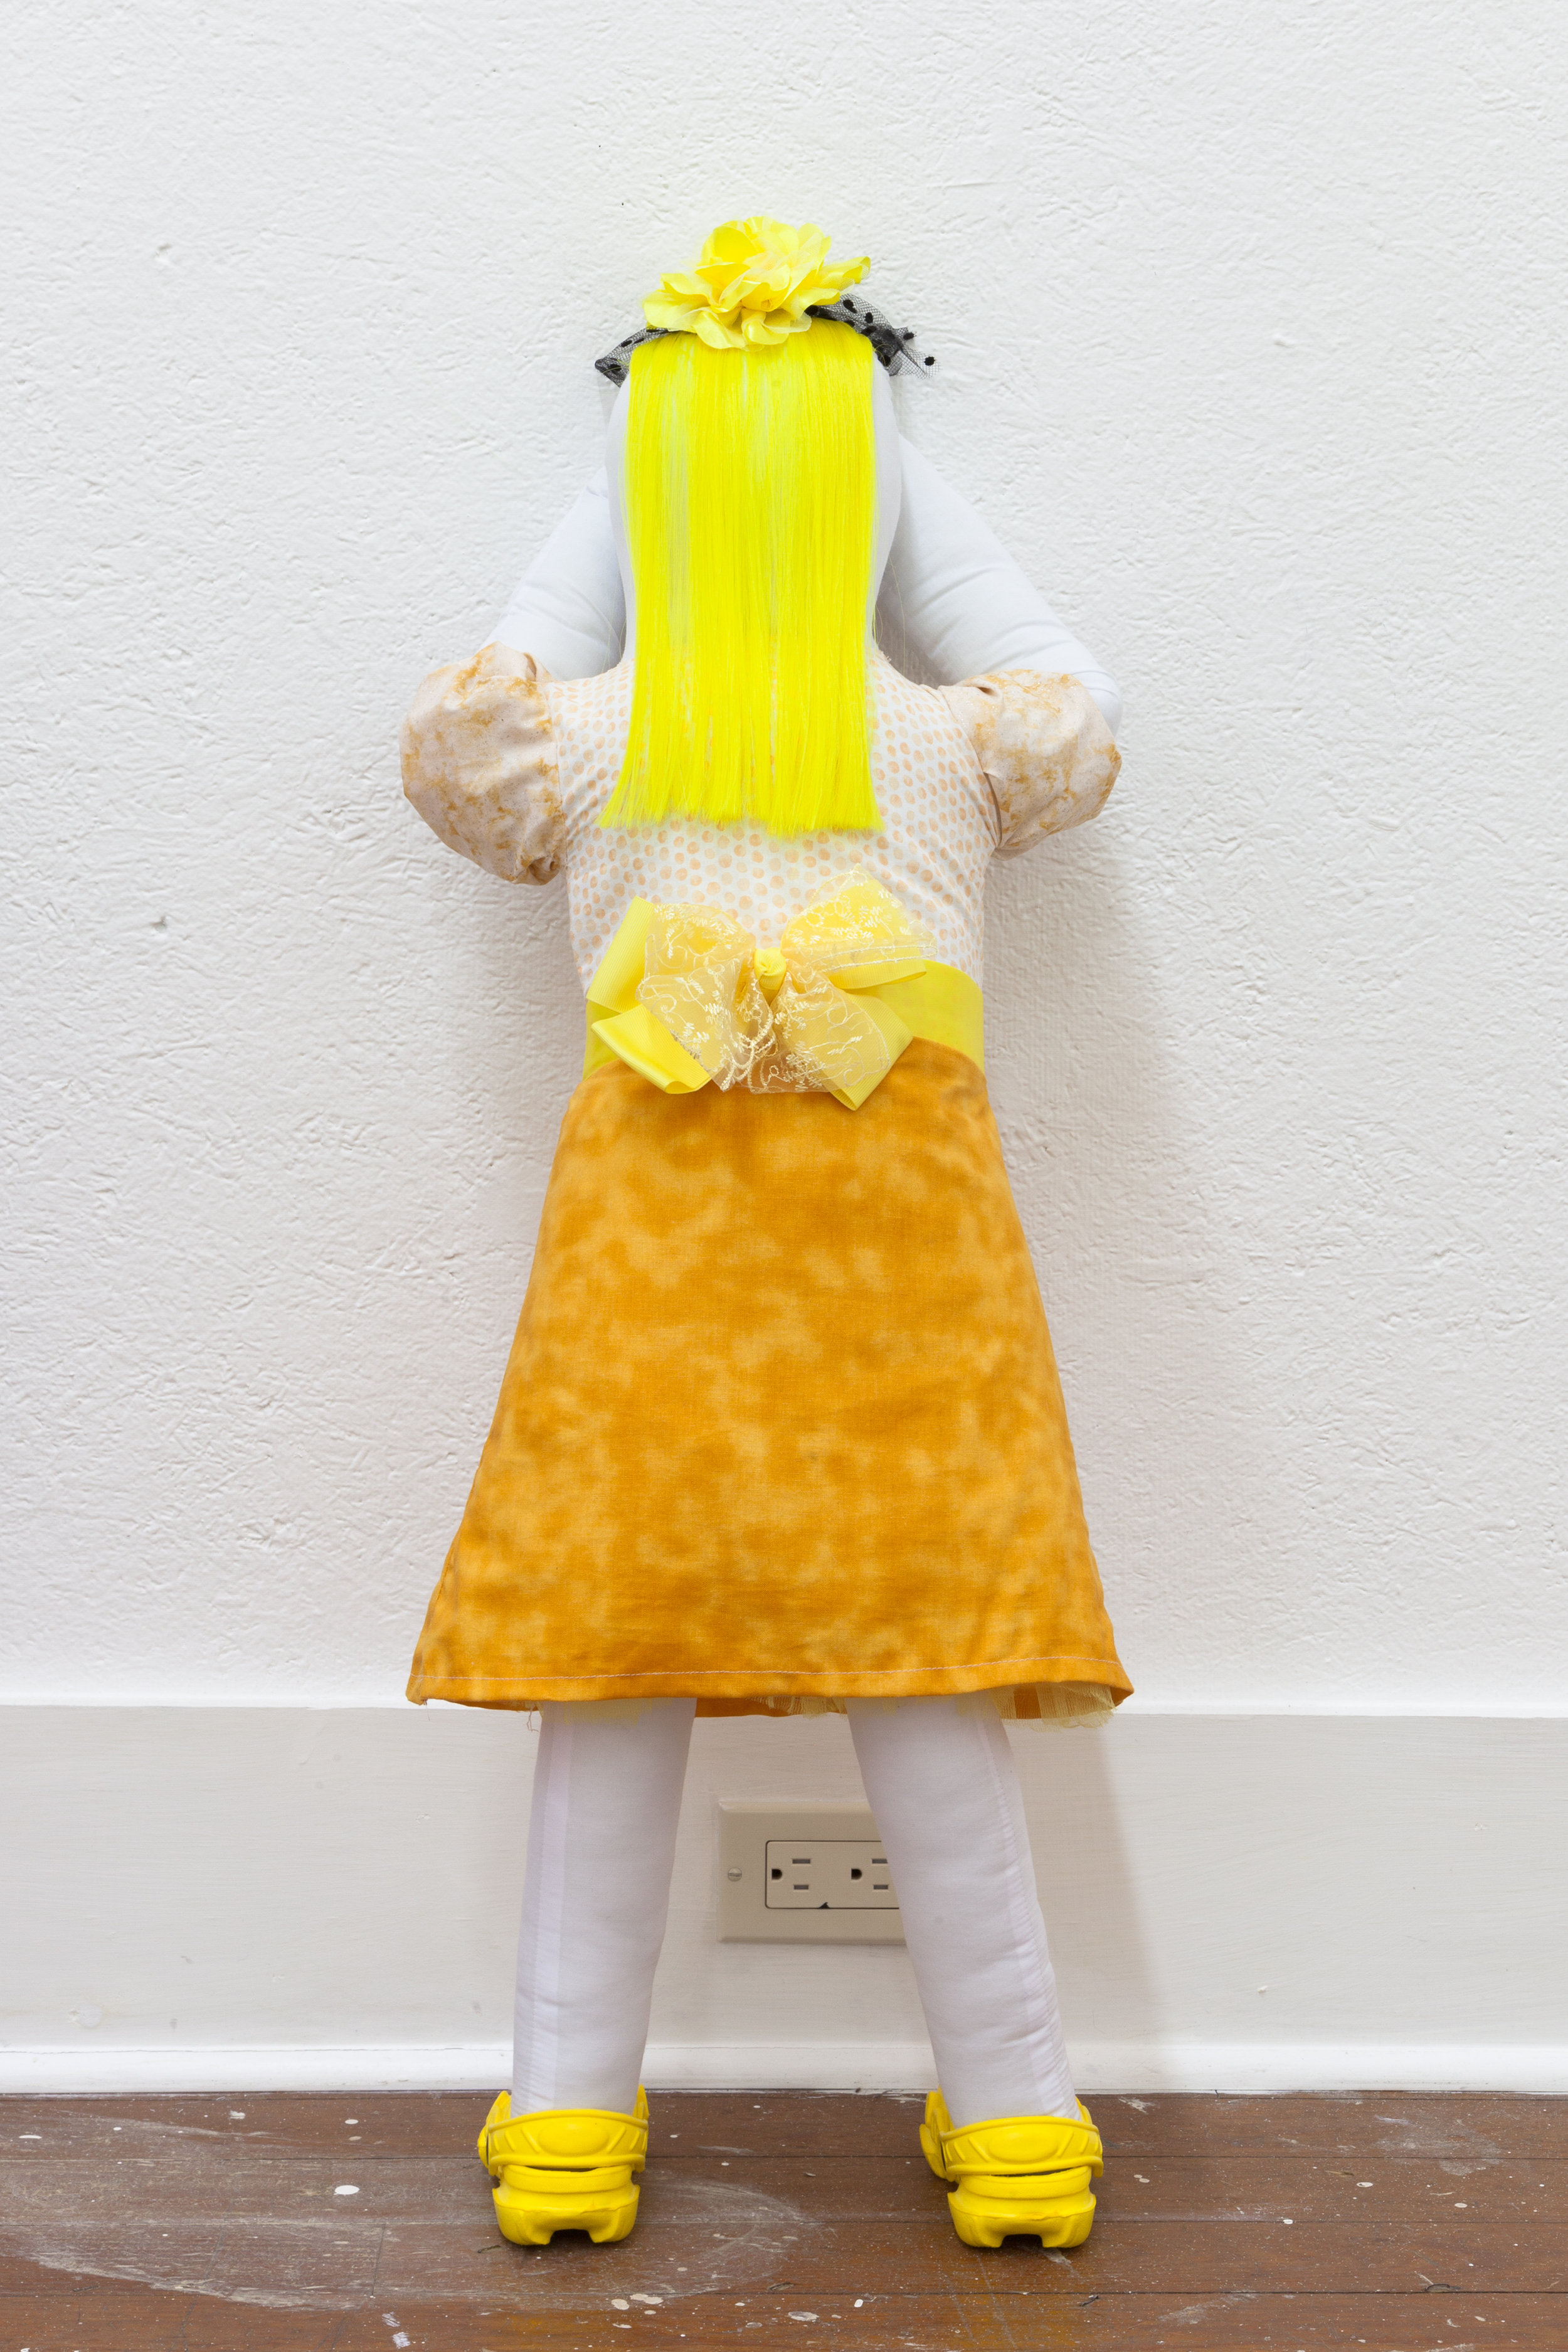  Abby Lloyd, Brigid, 2019, Fabric, Poly-Fil, ribbon, hair extensions, found materials Approximately 36 x 14 inches 